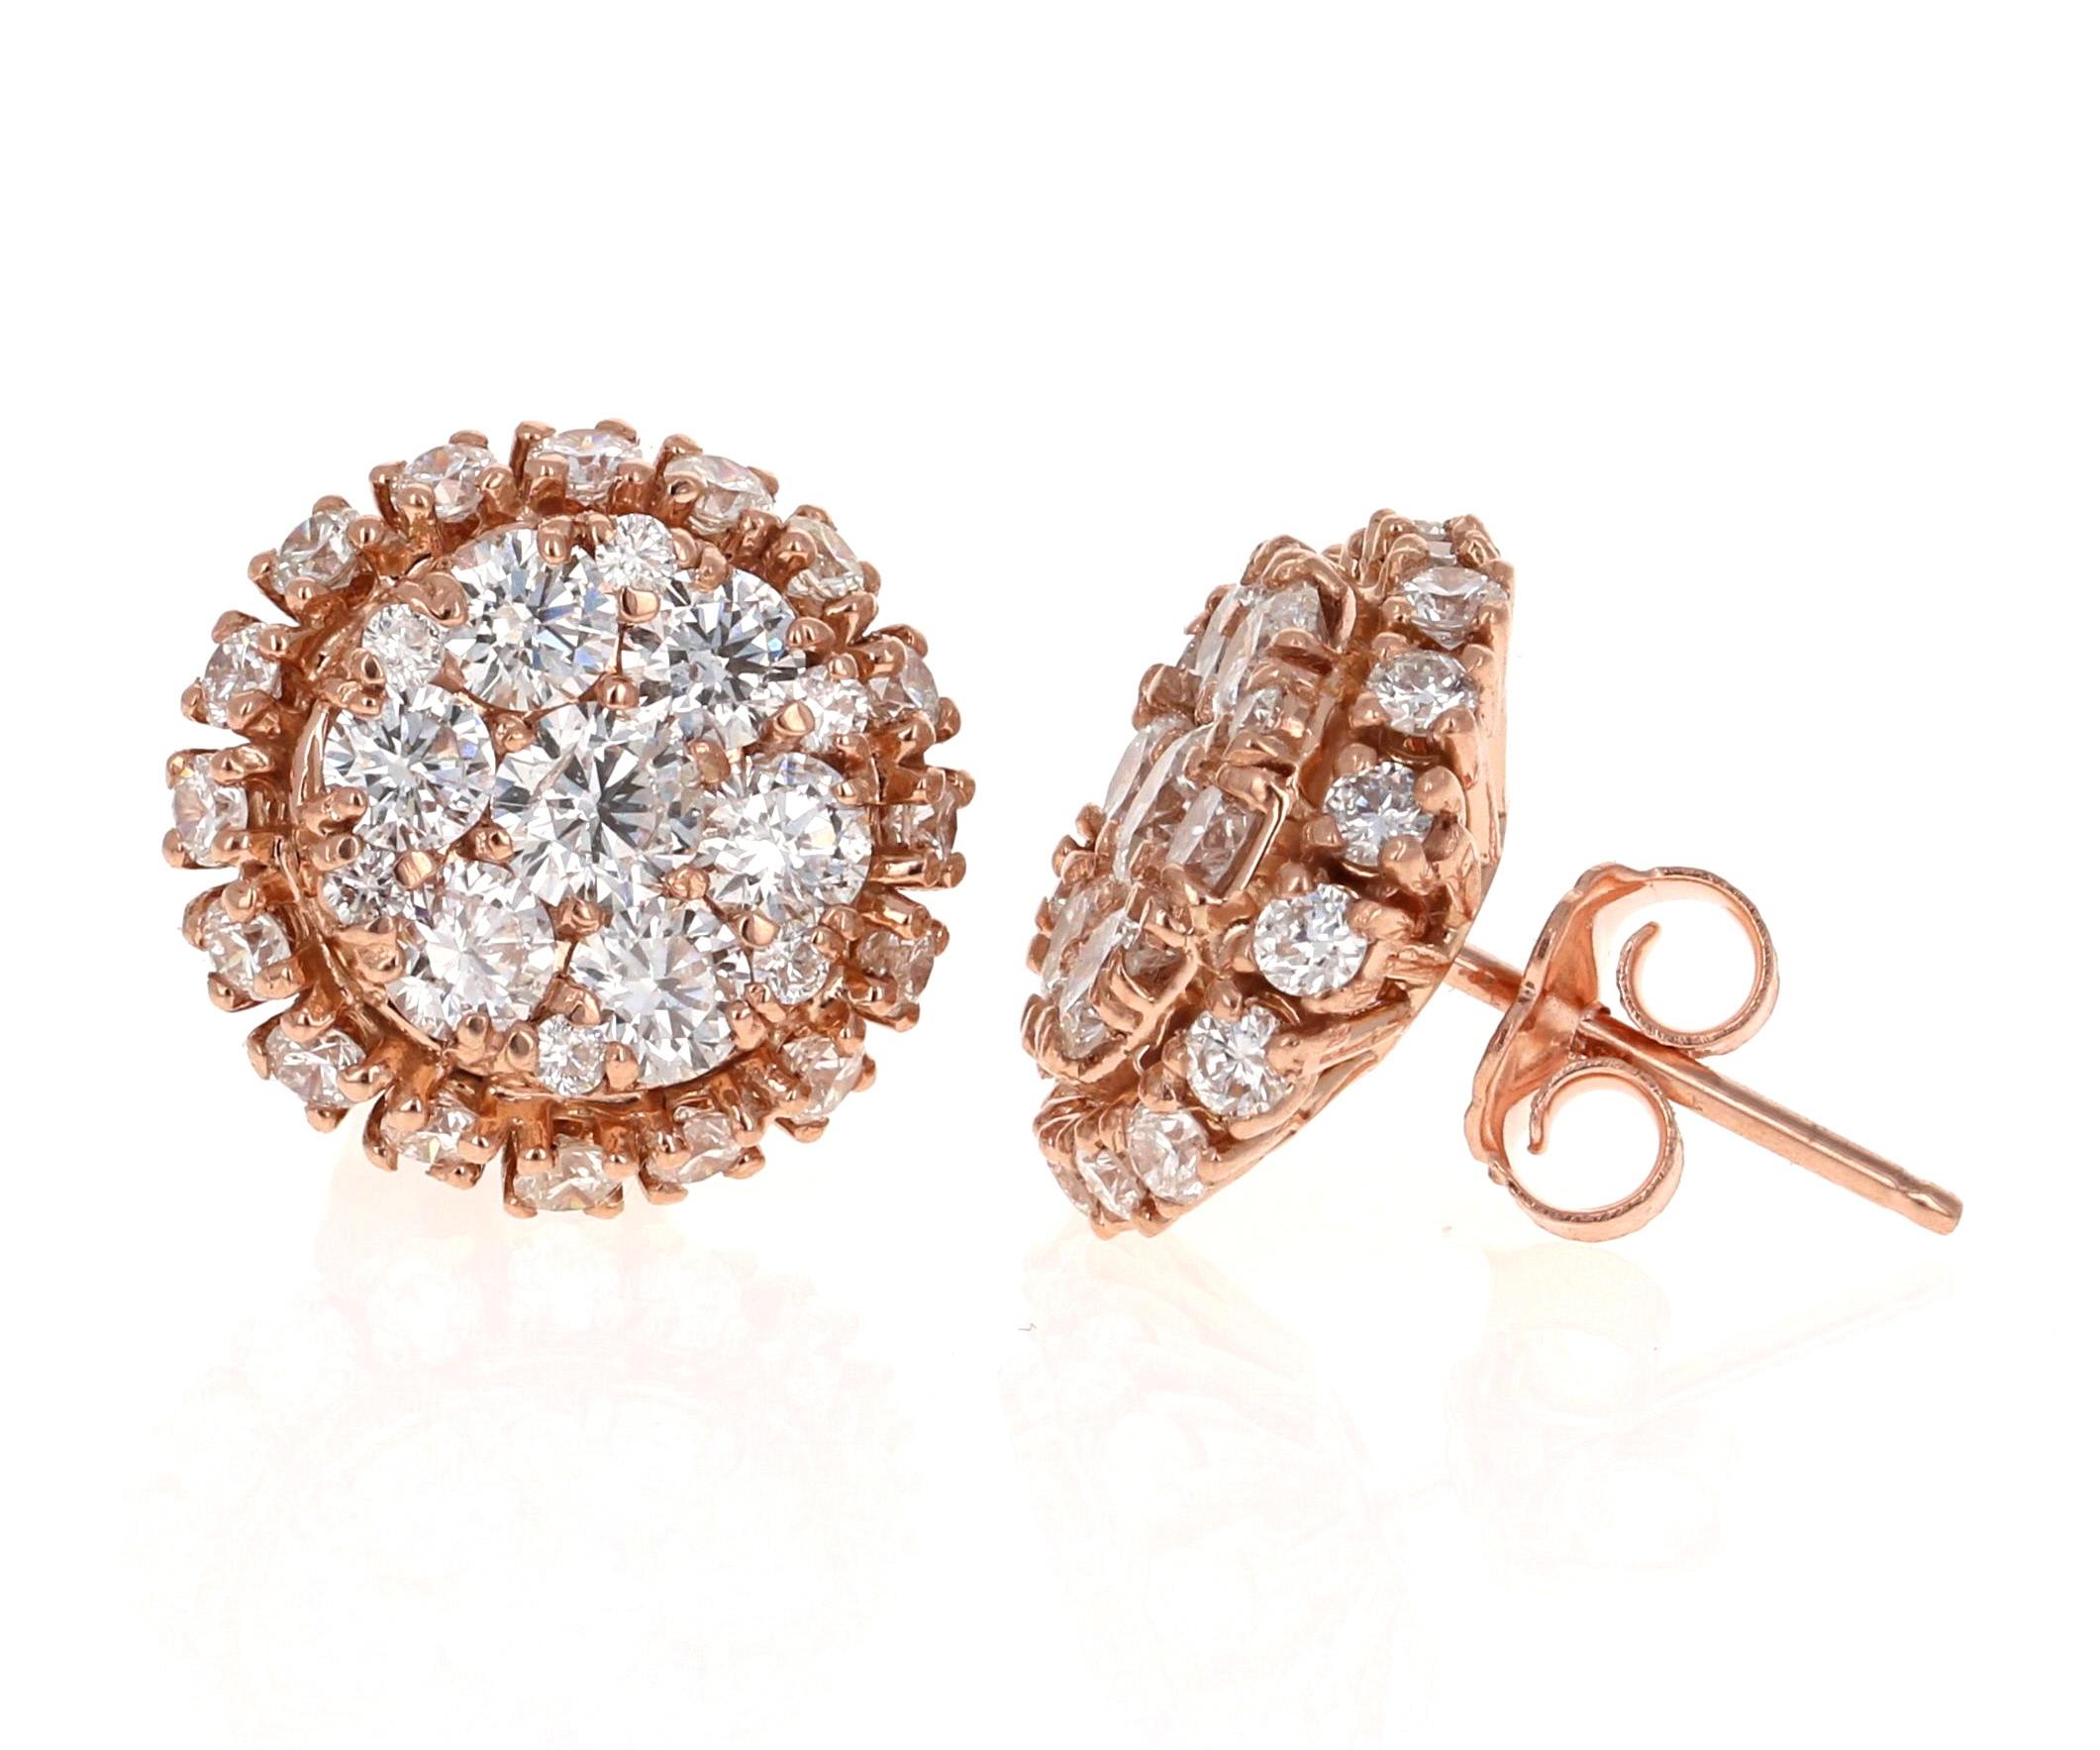 2.15 Carat Round Cut Diamond Floret-style Cluster Earrings in 14 Karat Rose Gold

These unique & intricate design earrings are sure to make a stunning statement!  There are 58 Round Brilliant Cut Diamonds that weigh 2.15 Carats.  The cluster style